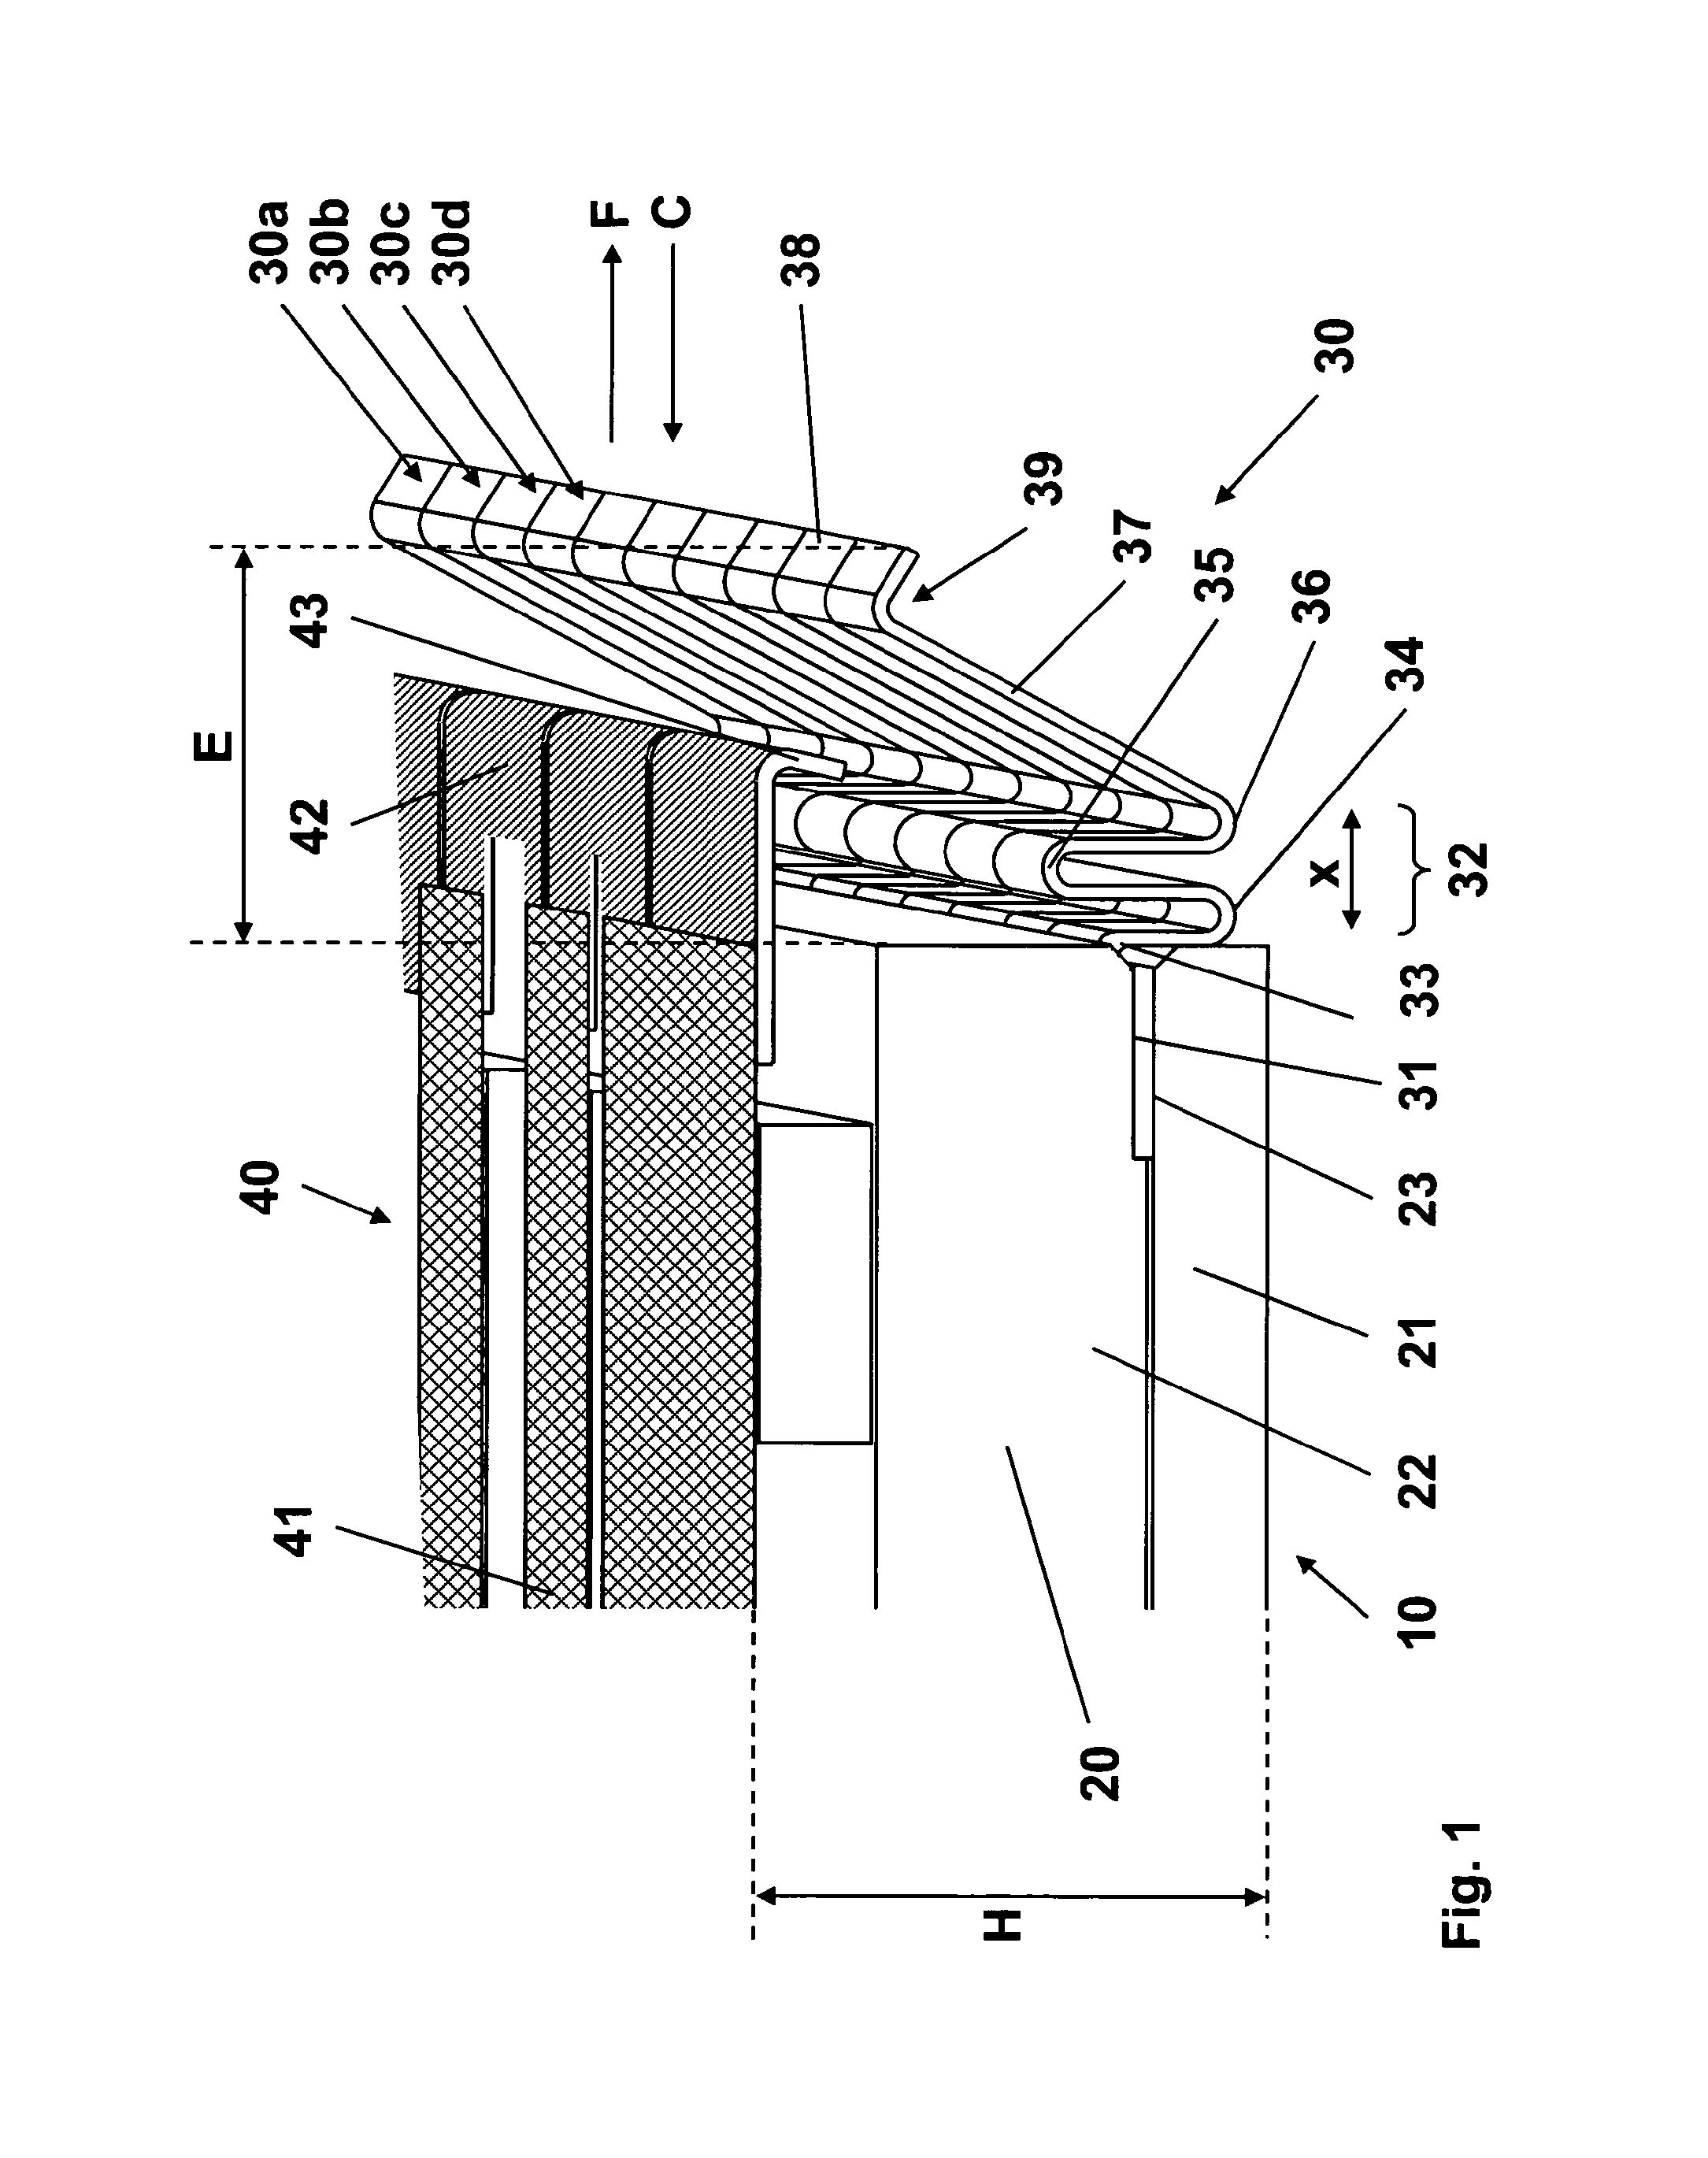 Mask support, mask assembly, and assembly comprising a mask support and a mask